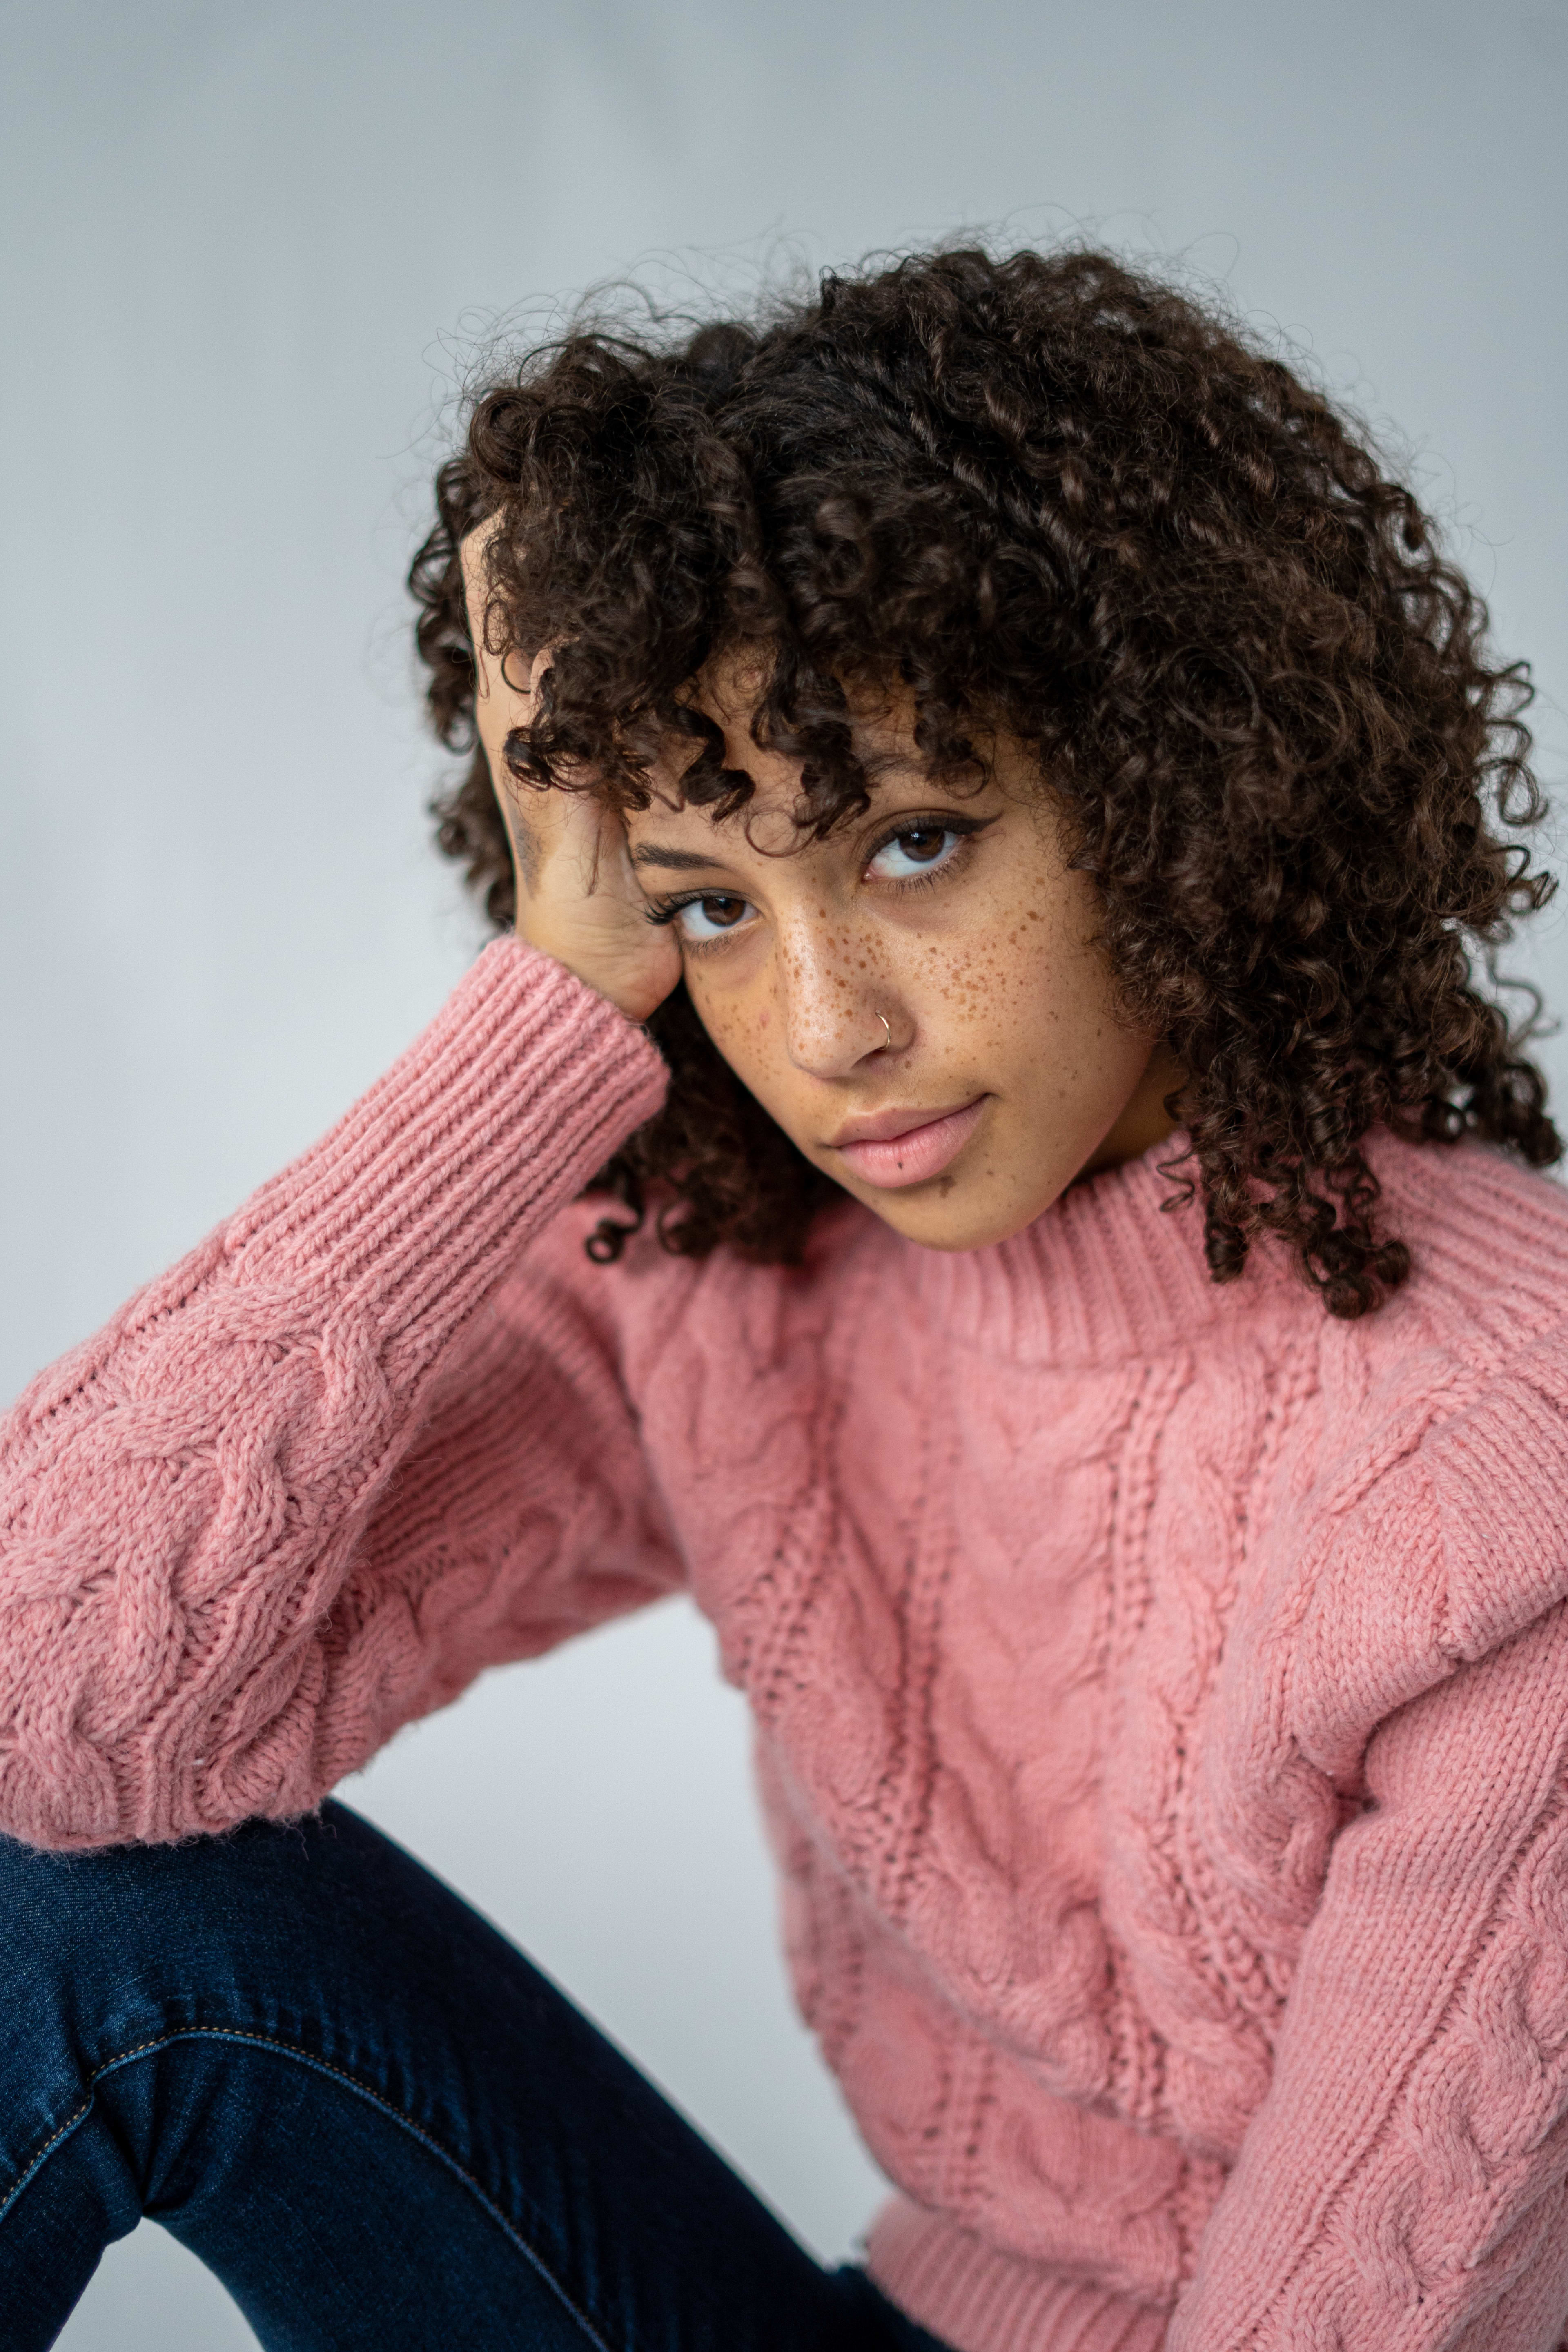 A portrait of a woman in pink with curly hair.